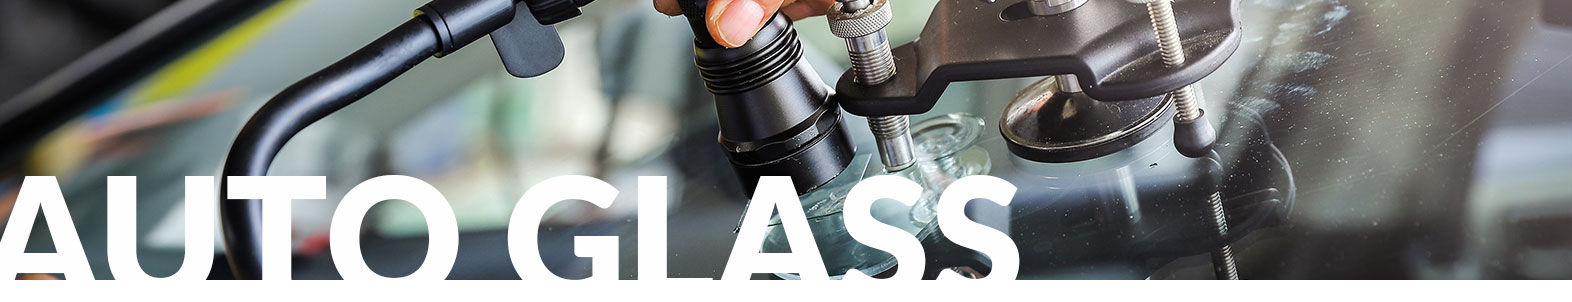 Auto Glass Repair Page Banner | Yates Collision